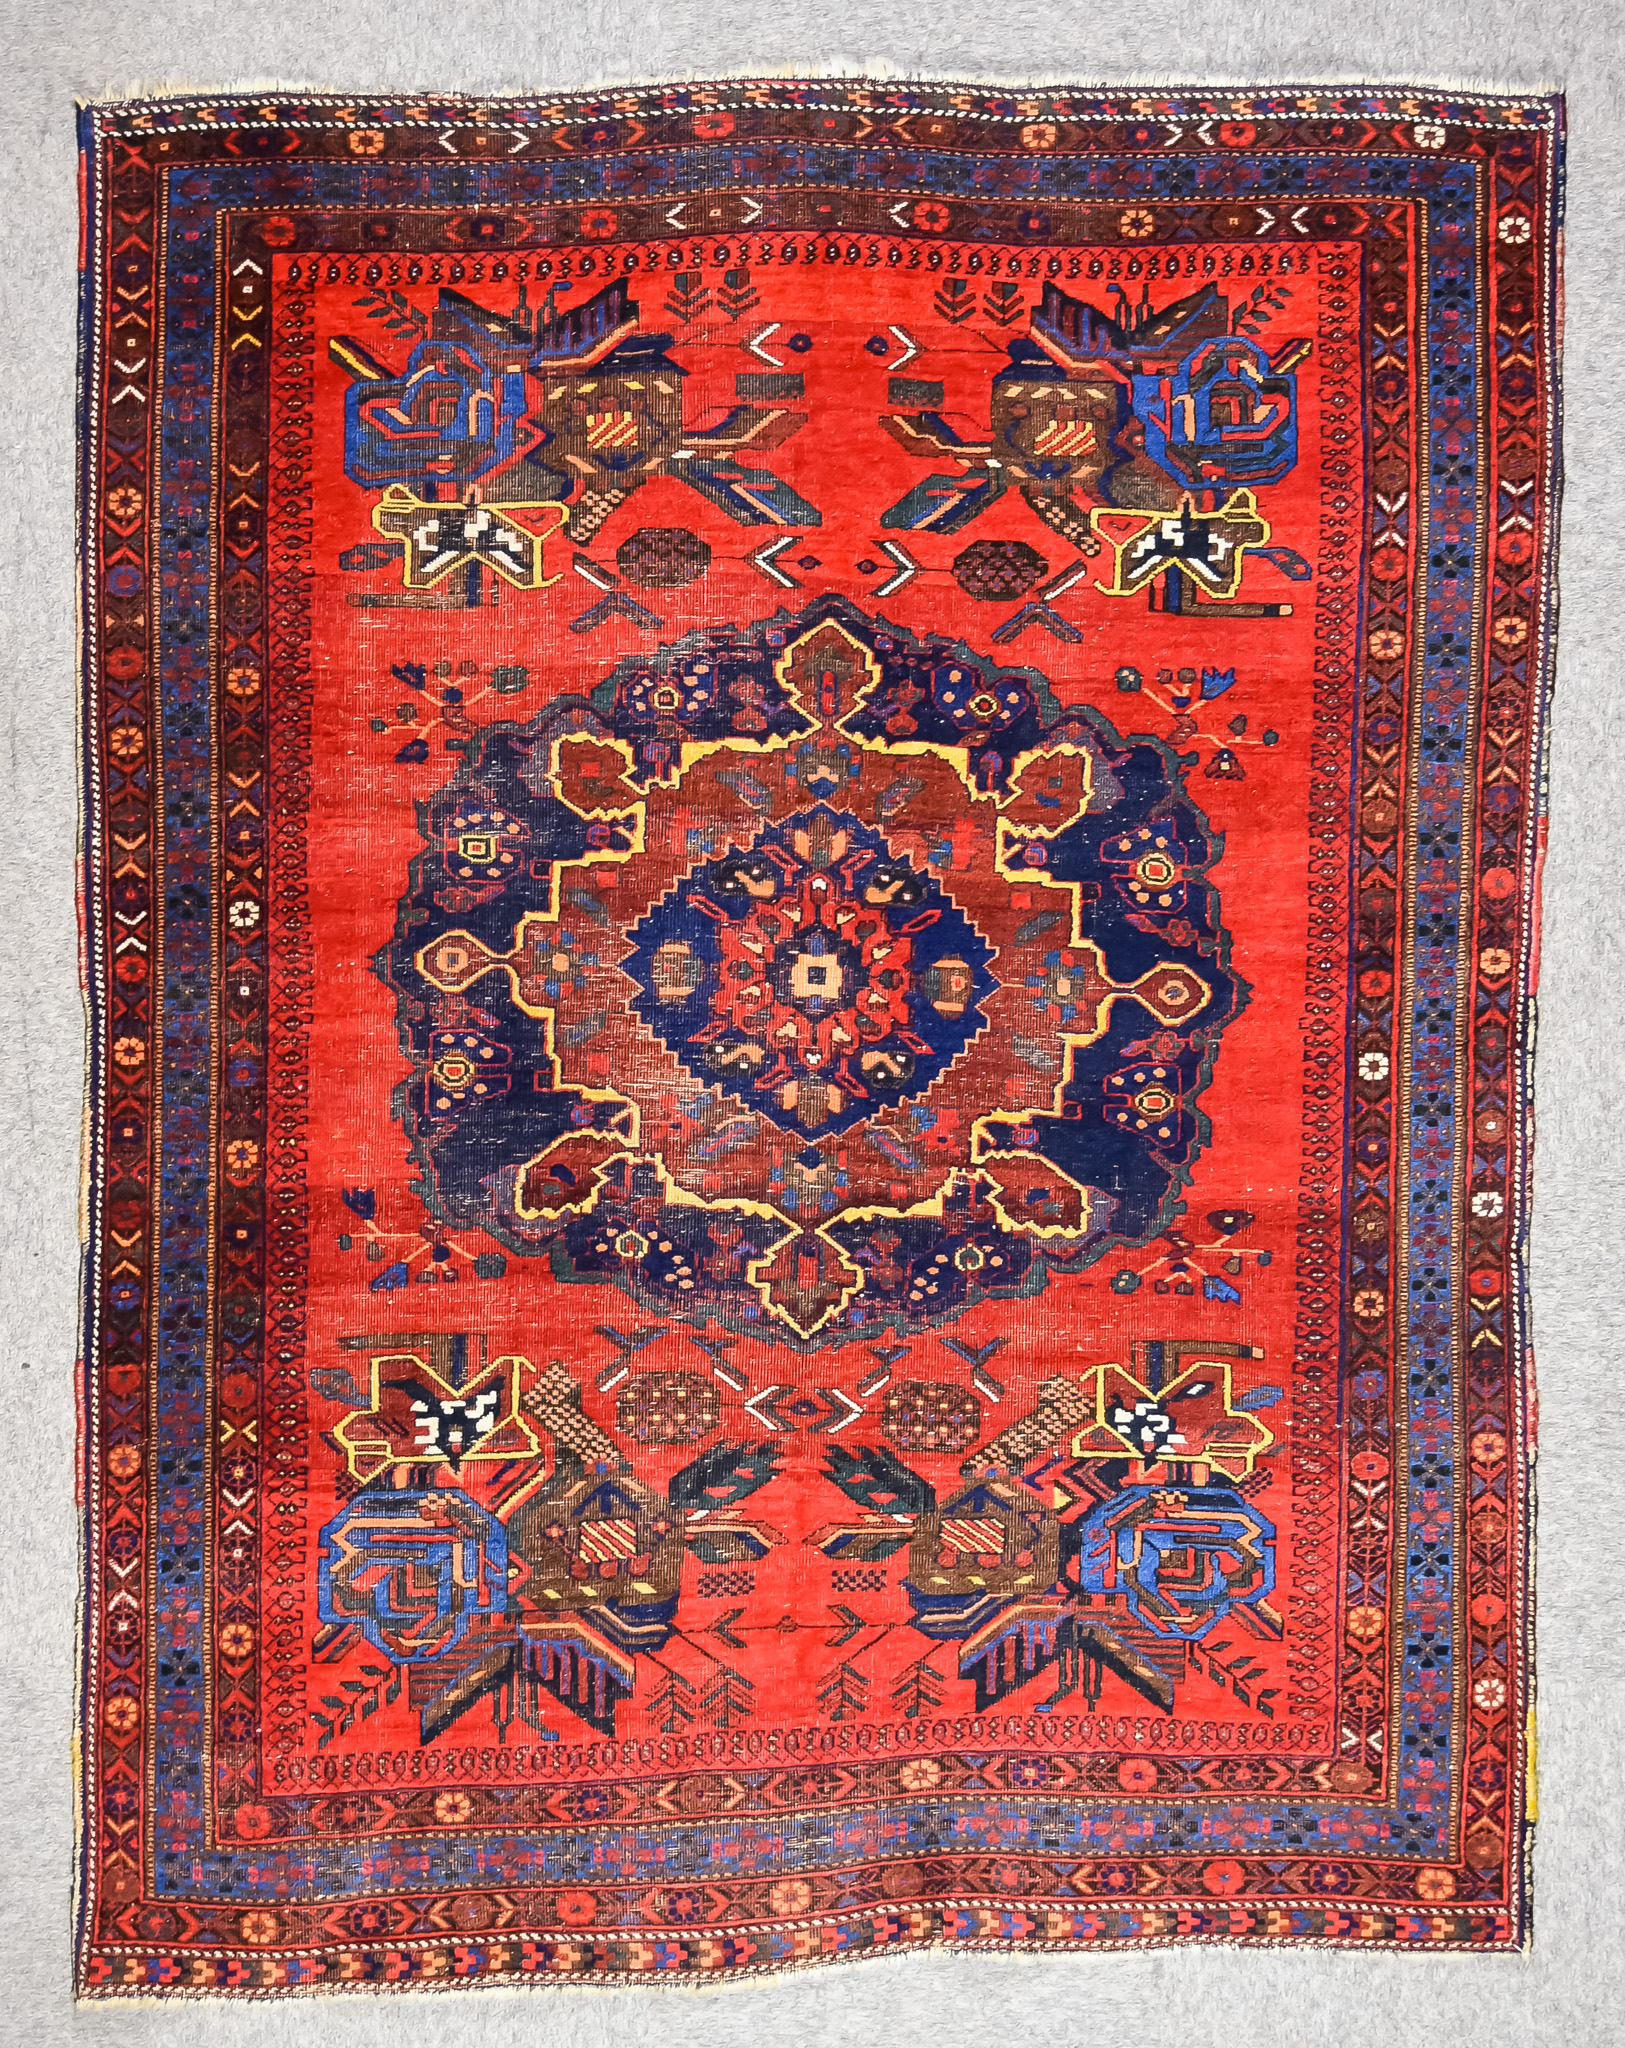 An Antique Afshar Rug, woven in colours of ivory, navy blue and wine, with a bold central floral